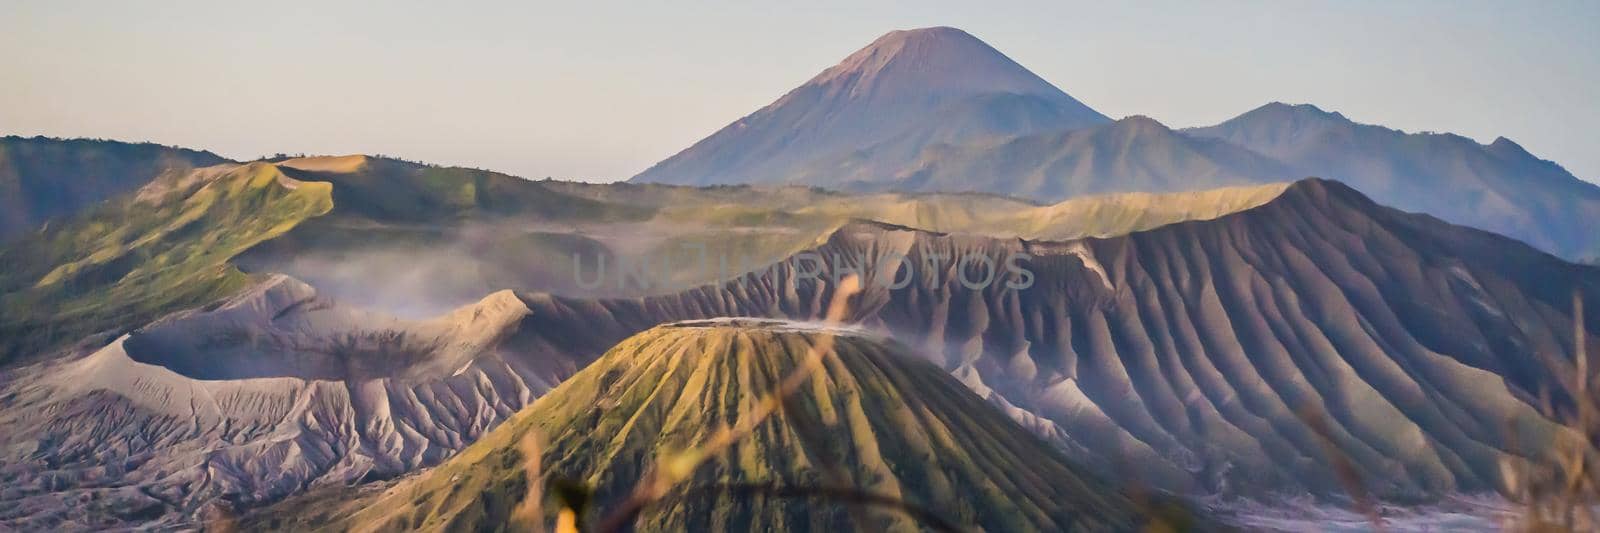 BANNER, LONG FORMAT Sunrise at the Bromo Tengger Semeru National Park on the Java Island, Indonesia. View on the Bromo or Gunung Bromo on Indonesian, Semeru and other volcanoes located inside of the Sea of Sand within the Tengger Caldera. One of the most famous volcanic objects in the world. Travel to Indonesia concept by galitskaya